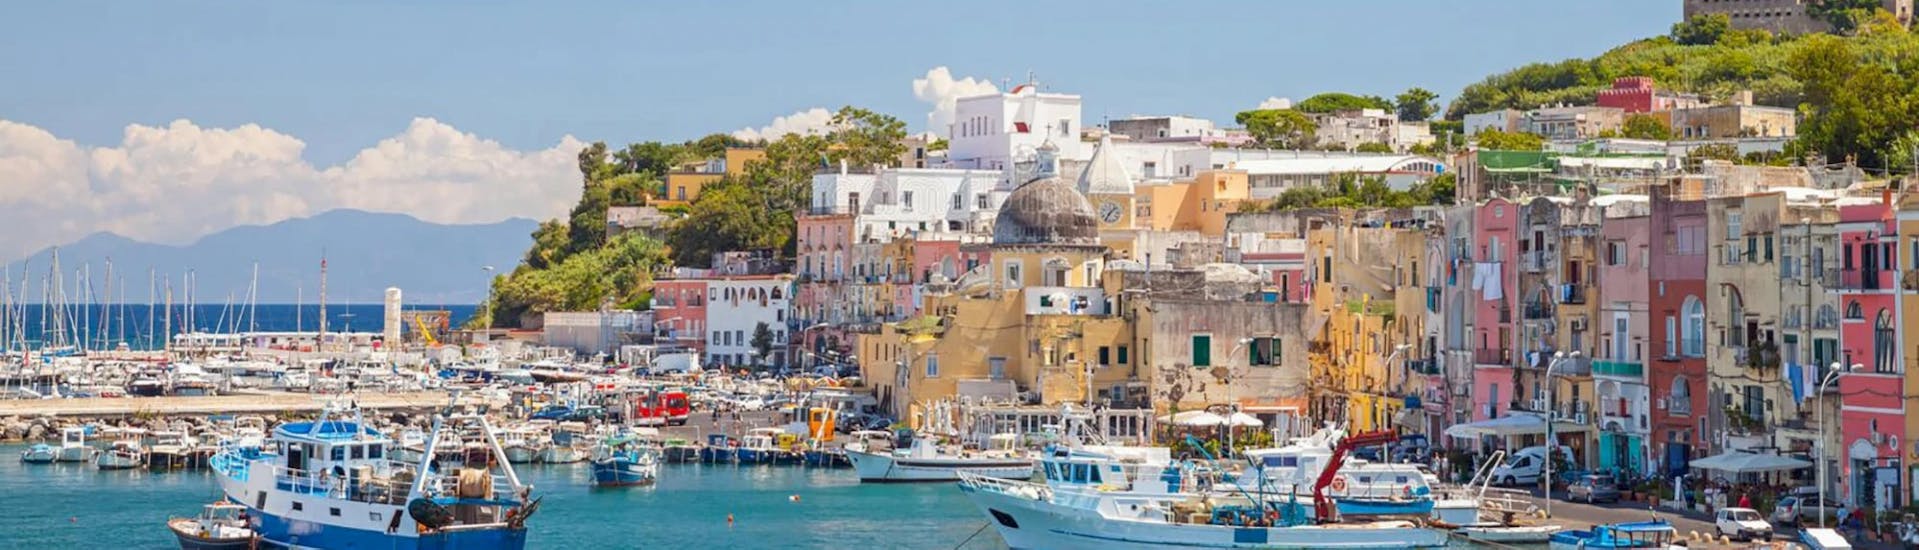 Procida, one of the main attractions of the Boat Trip to Procida with Swimming and Lunch with Alcione Boat Ischia.